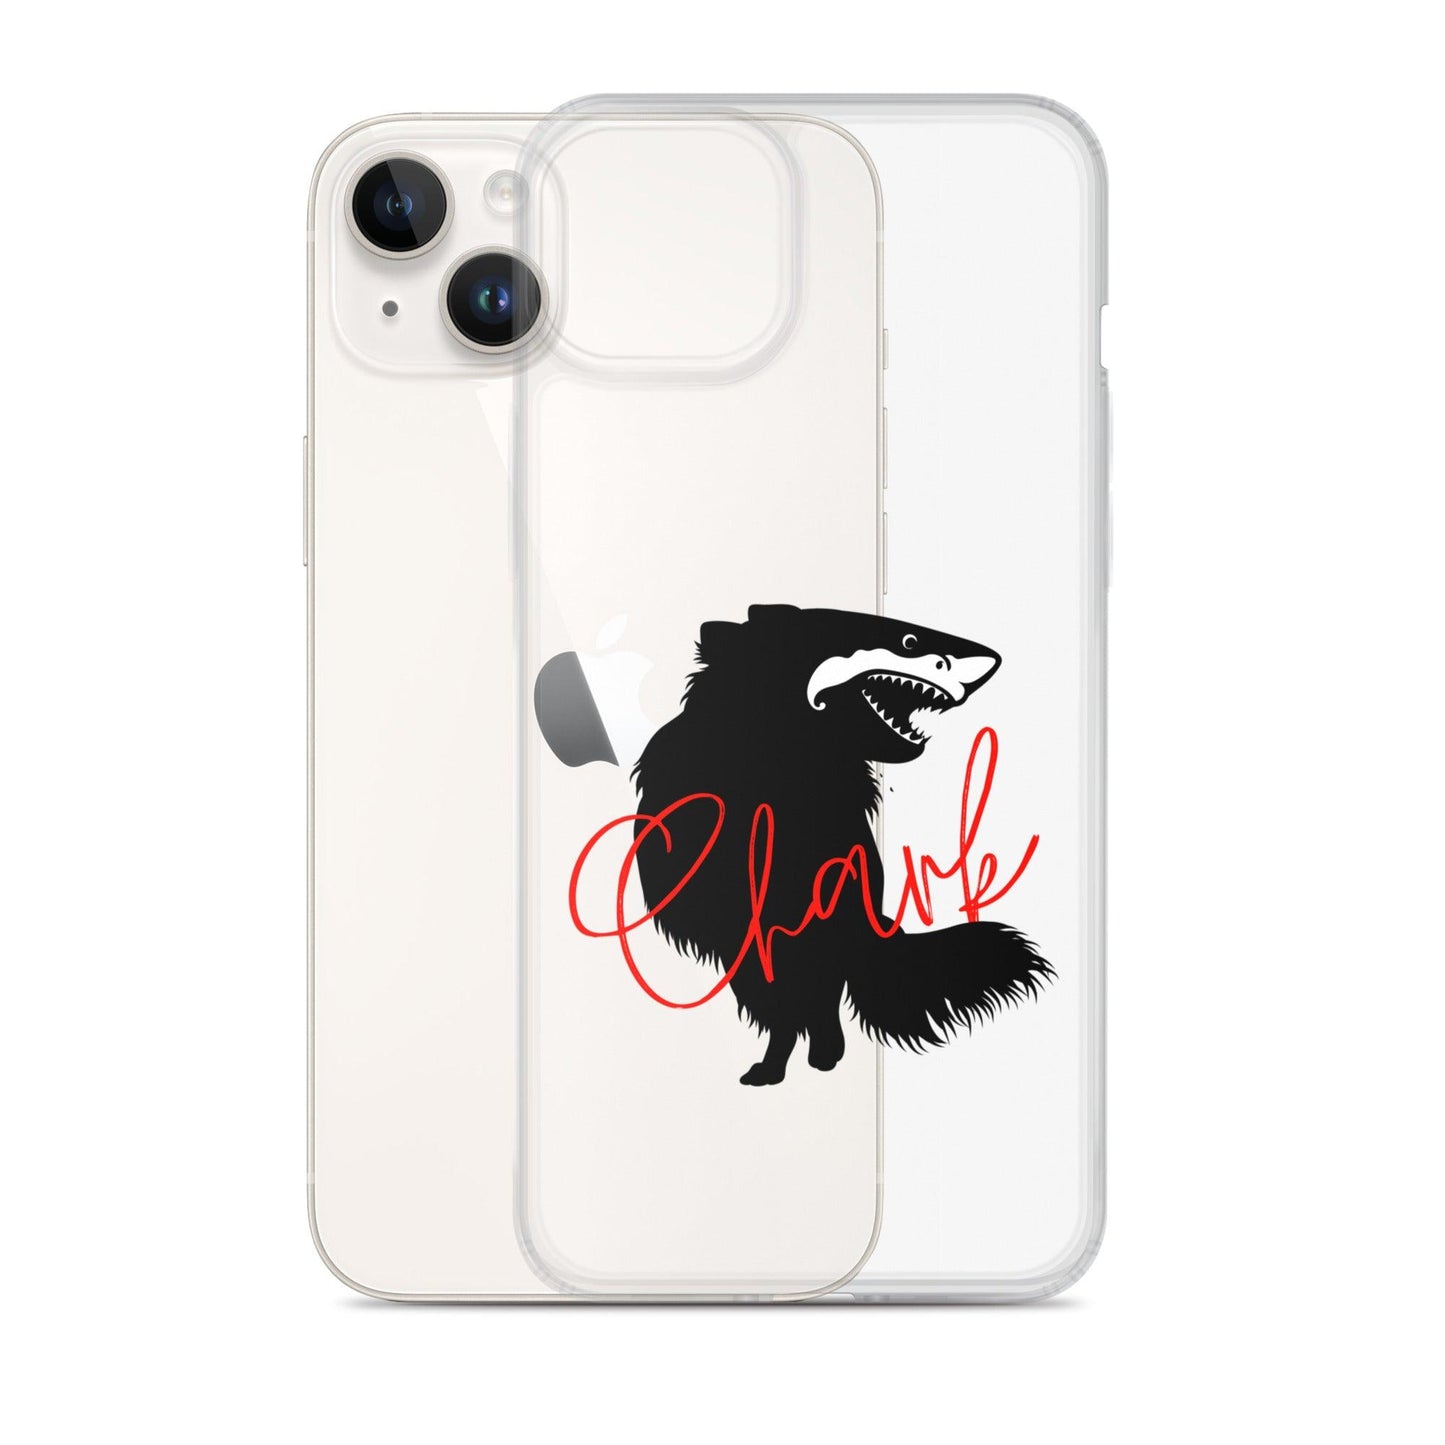 Chihuahua + Shark = Chark Clear iPhone case with the black silhouette of a longhaired chihuahua with the face of a great white shark - mouth open to show off jaws lined with lots of sharp white teeth. The word "Chark" is artfully placed in red cursive font over the image. For trendy chi lovers. iPhone 14 plus case.